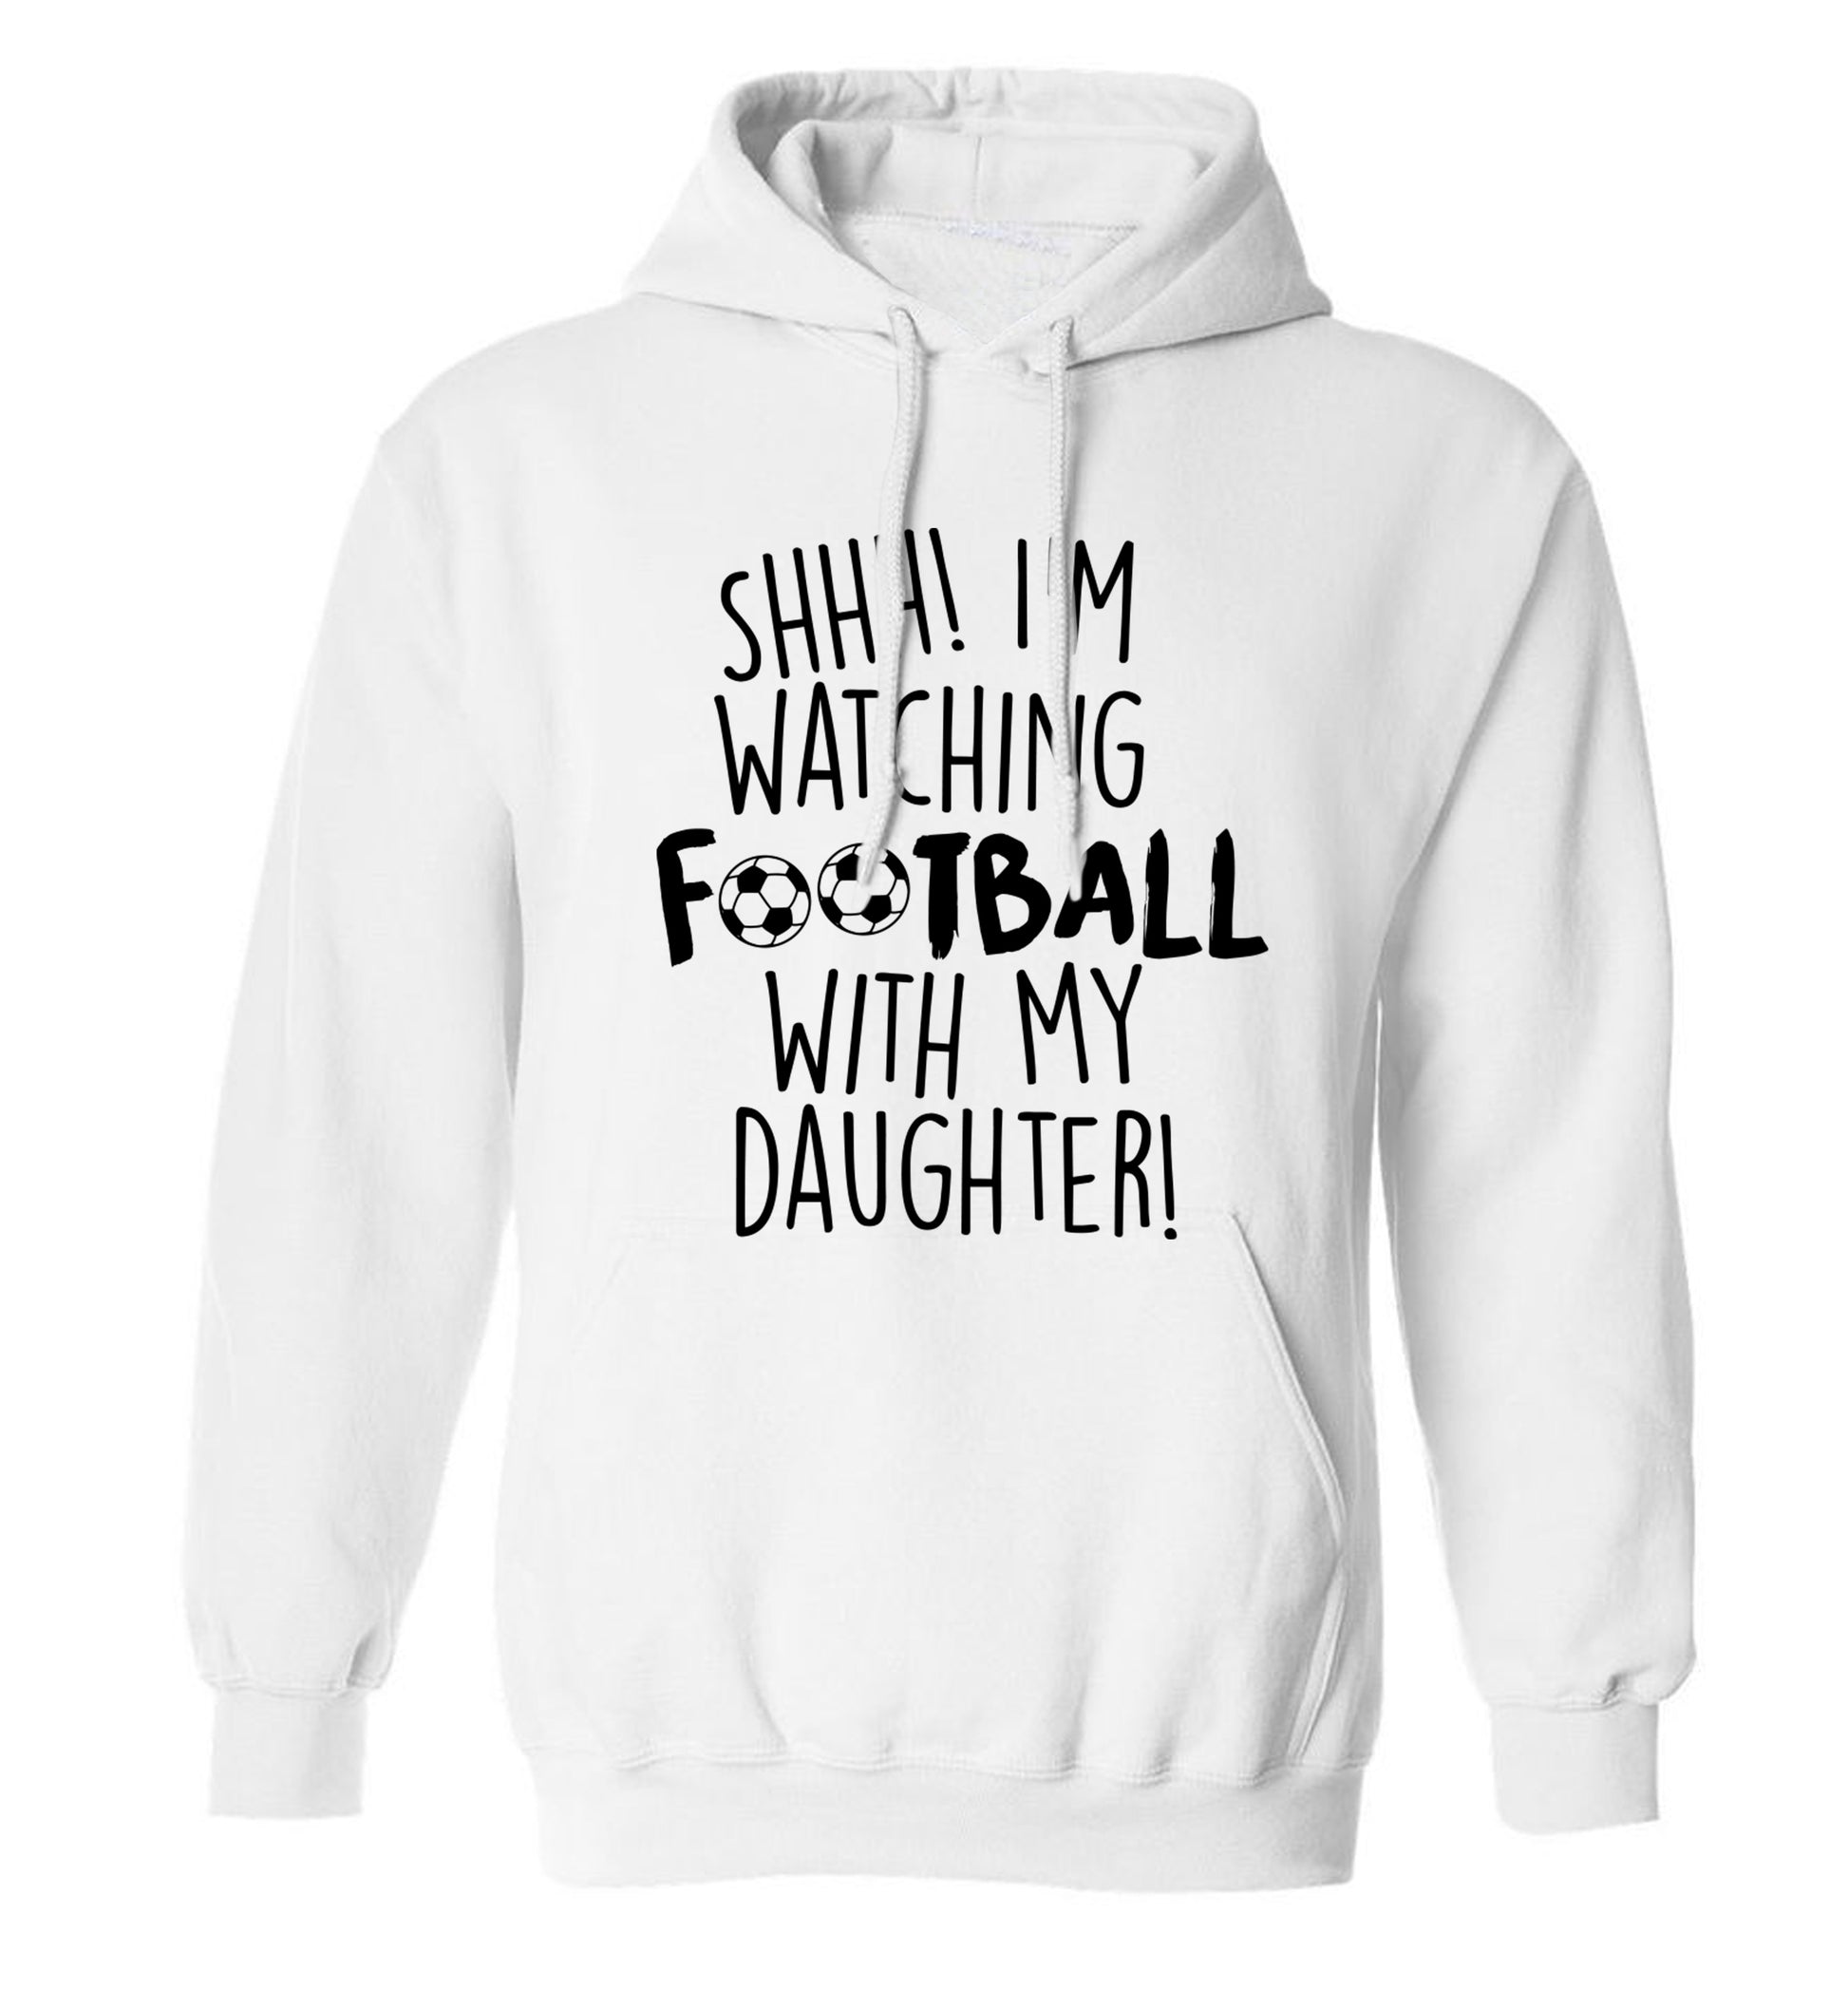 Shhh I'm watching football with my daughter adults unisexwhite hoodie 2XL